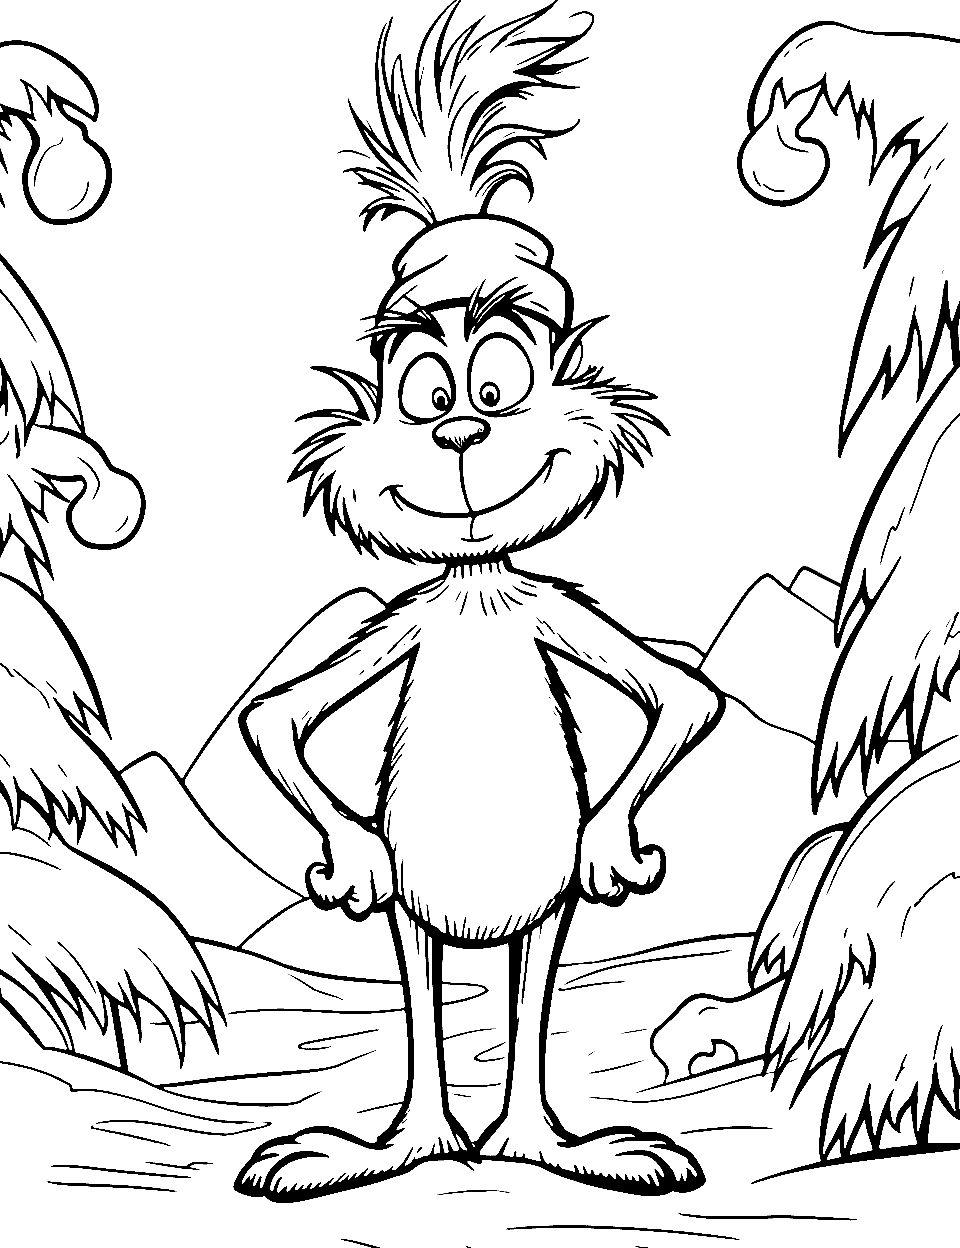 Grinch’s Winter Wonderland Coloring Page - The Grinch is out for a stroll on a cold winter night.